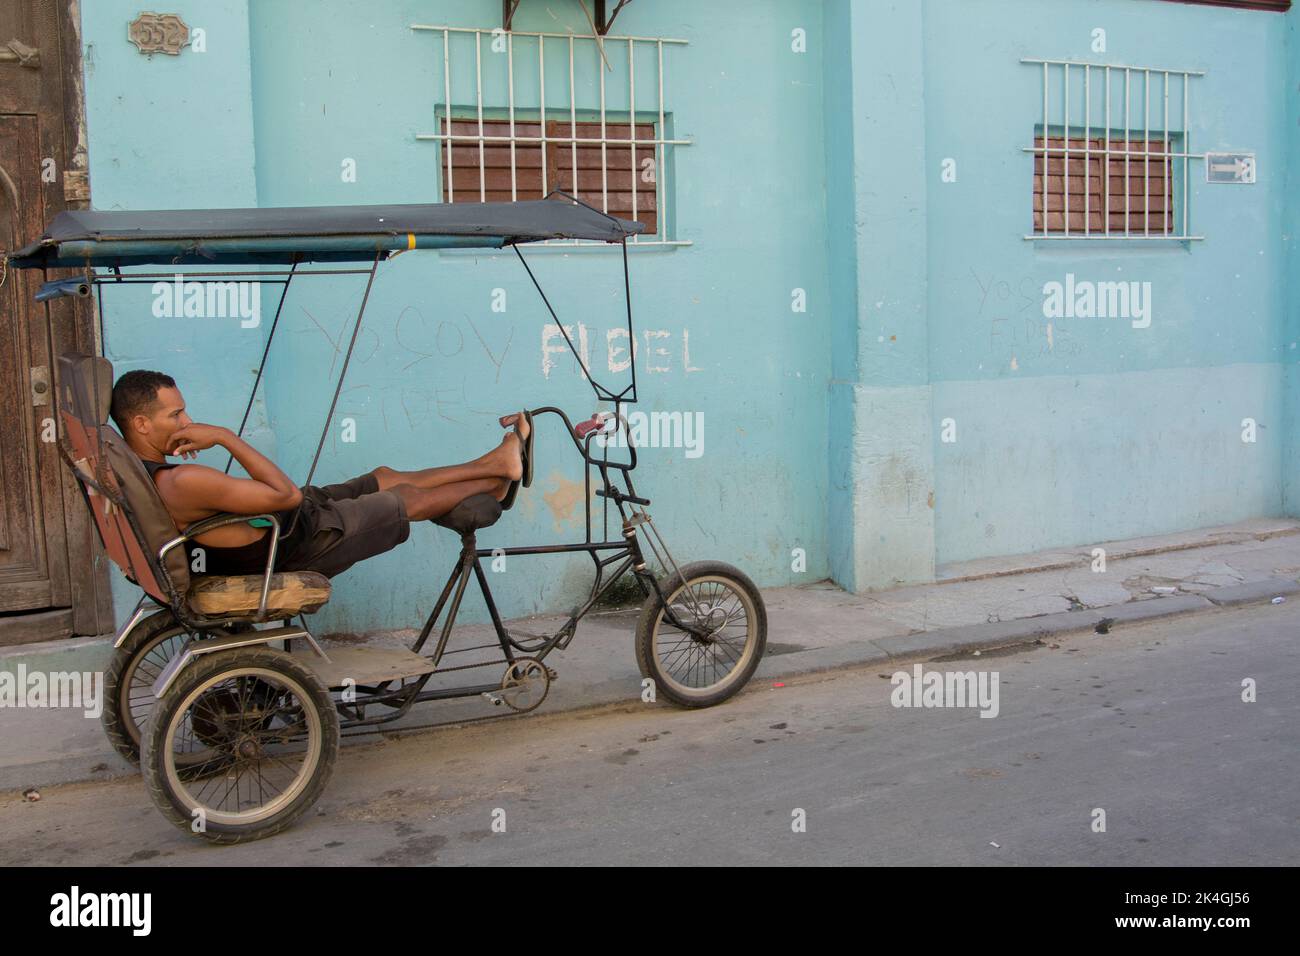 Young man resting on top of his bicycle in front of a house with a tribute to the late Cuban President Fidel Castro written on the wall. Stock Photo